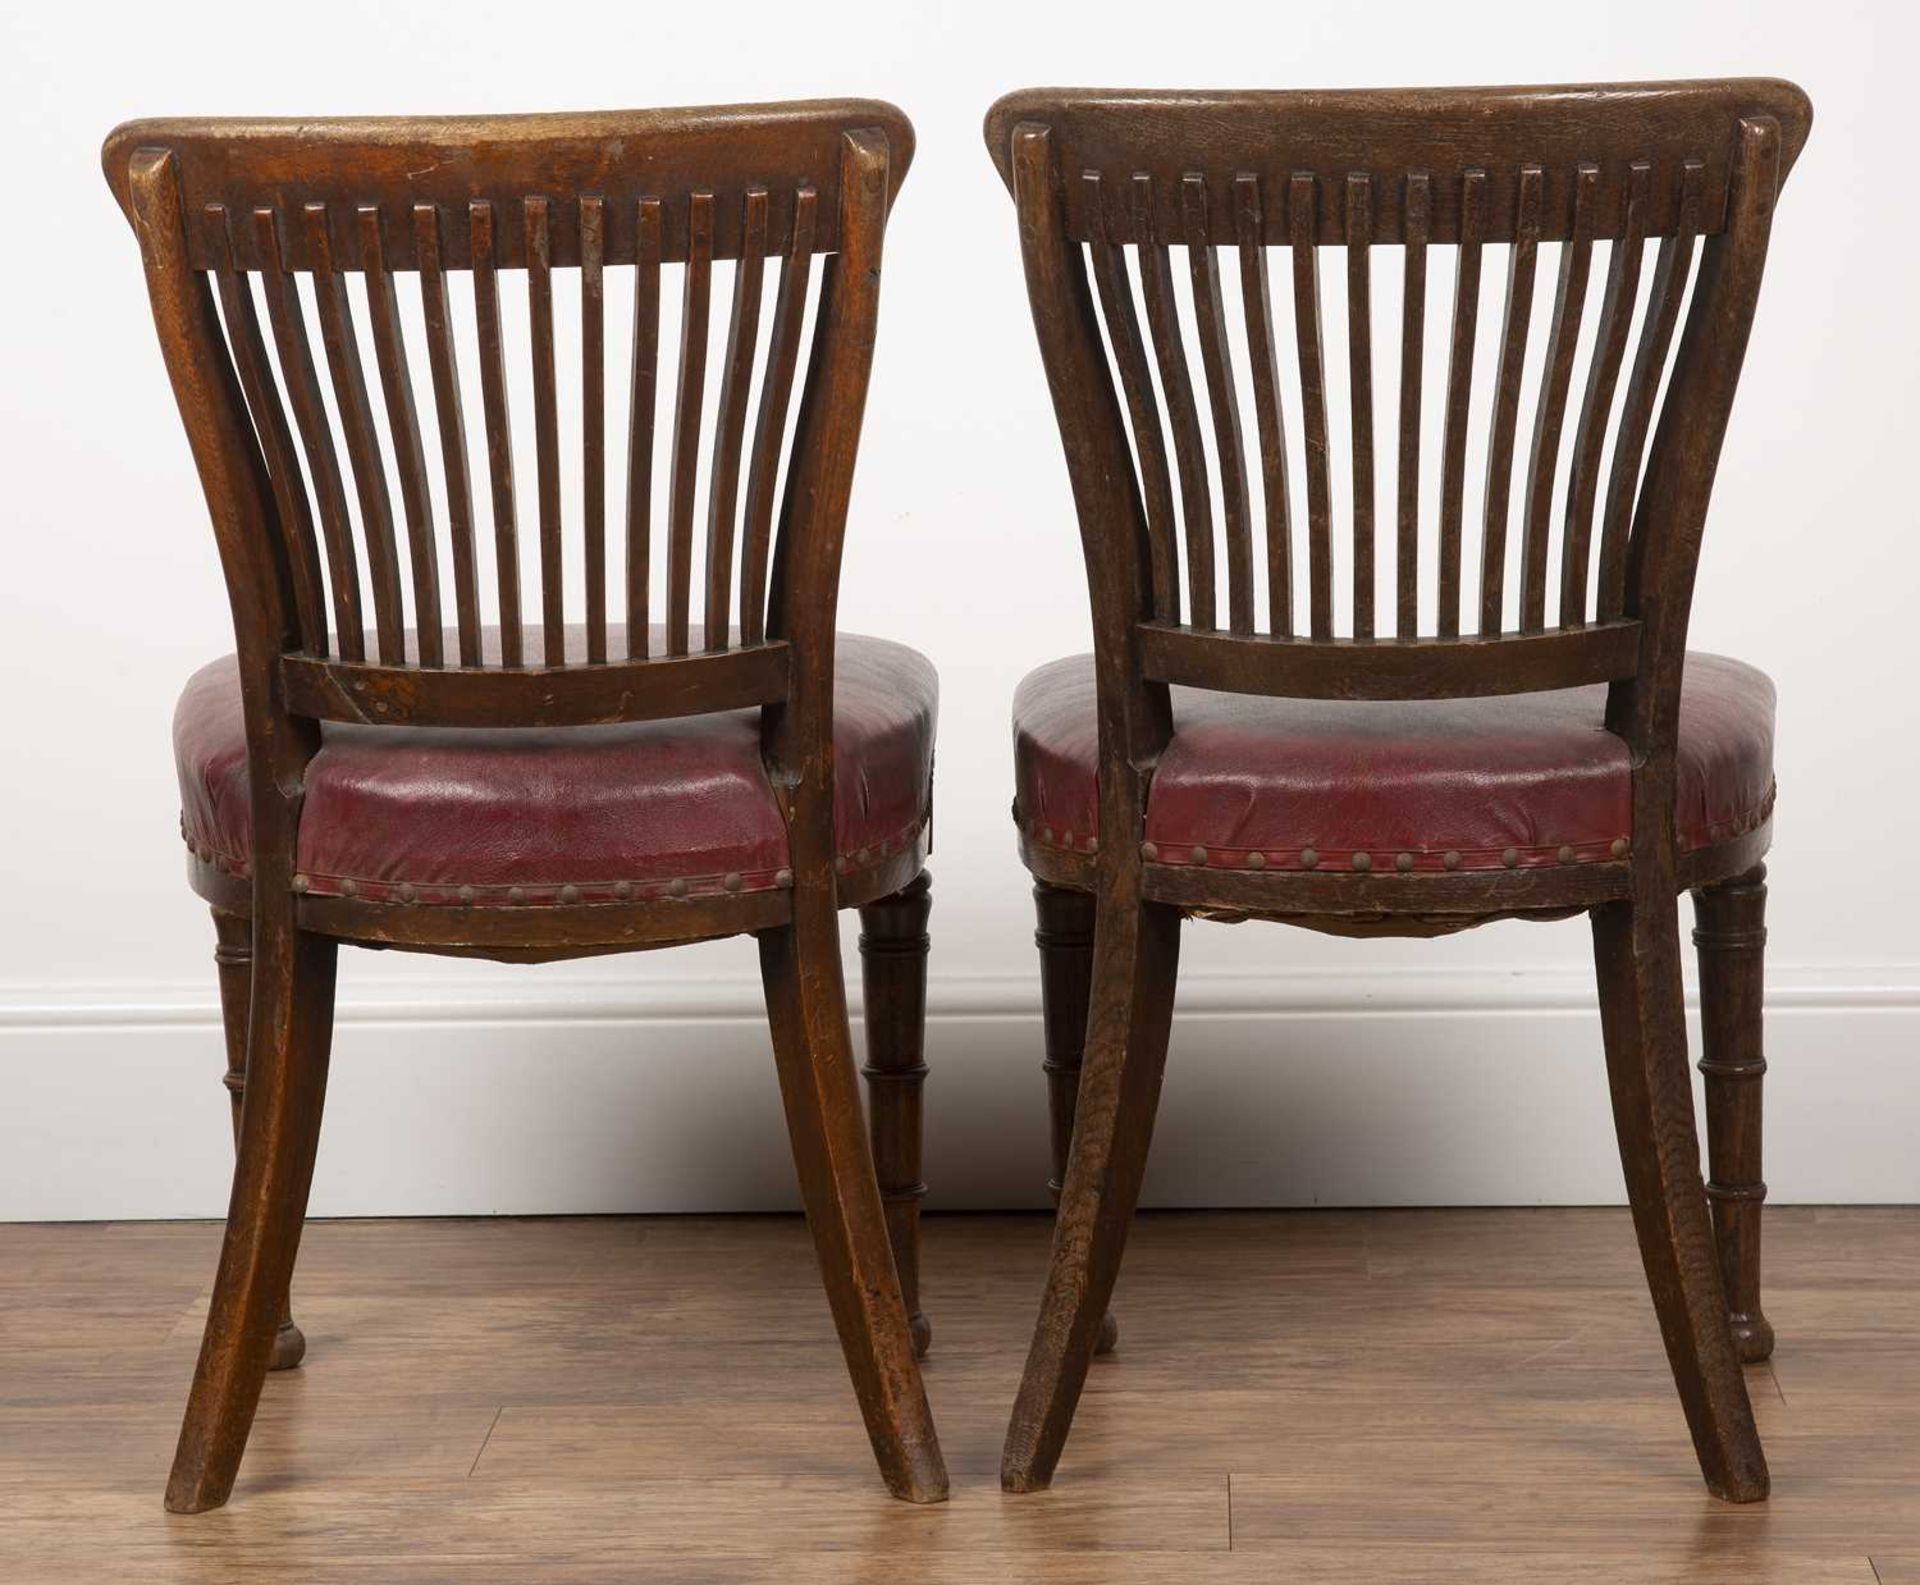 Attributed to Edward William Godwin (1833-1886) for James Peddle Late 19th Century, pair of oak - Bild 2 aus 2